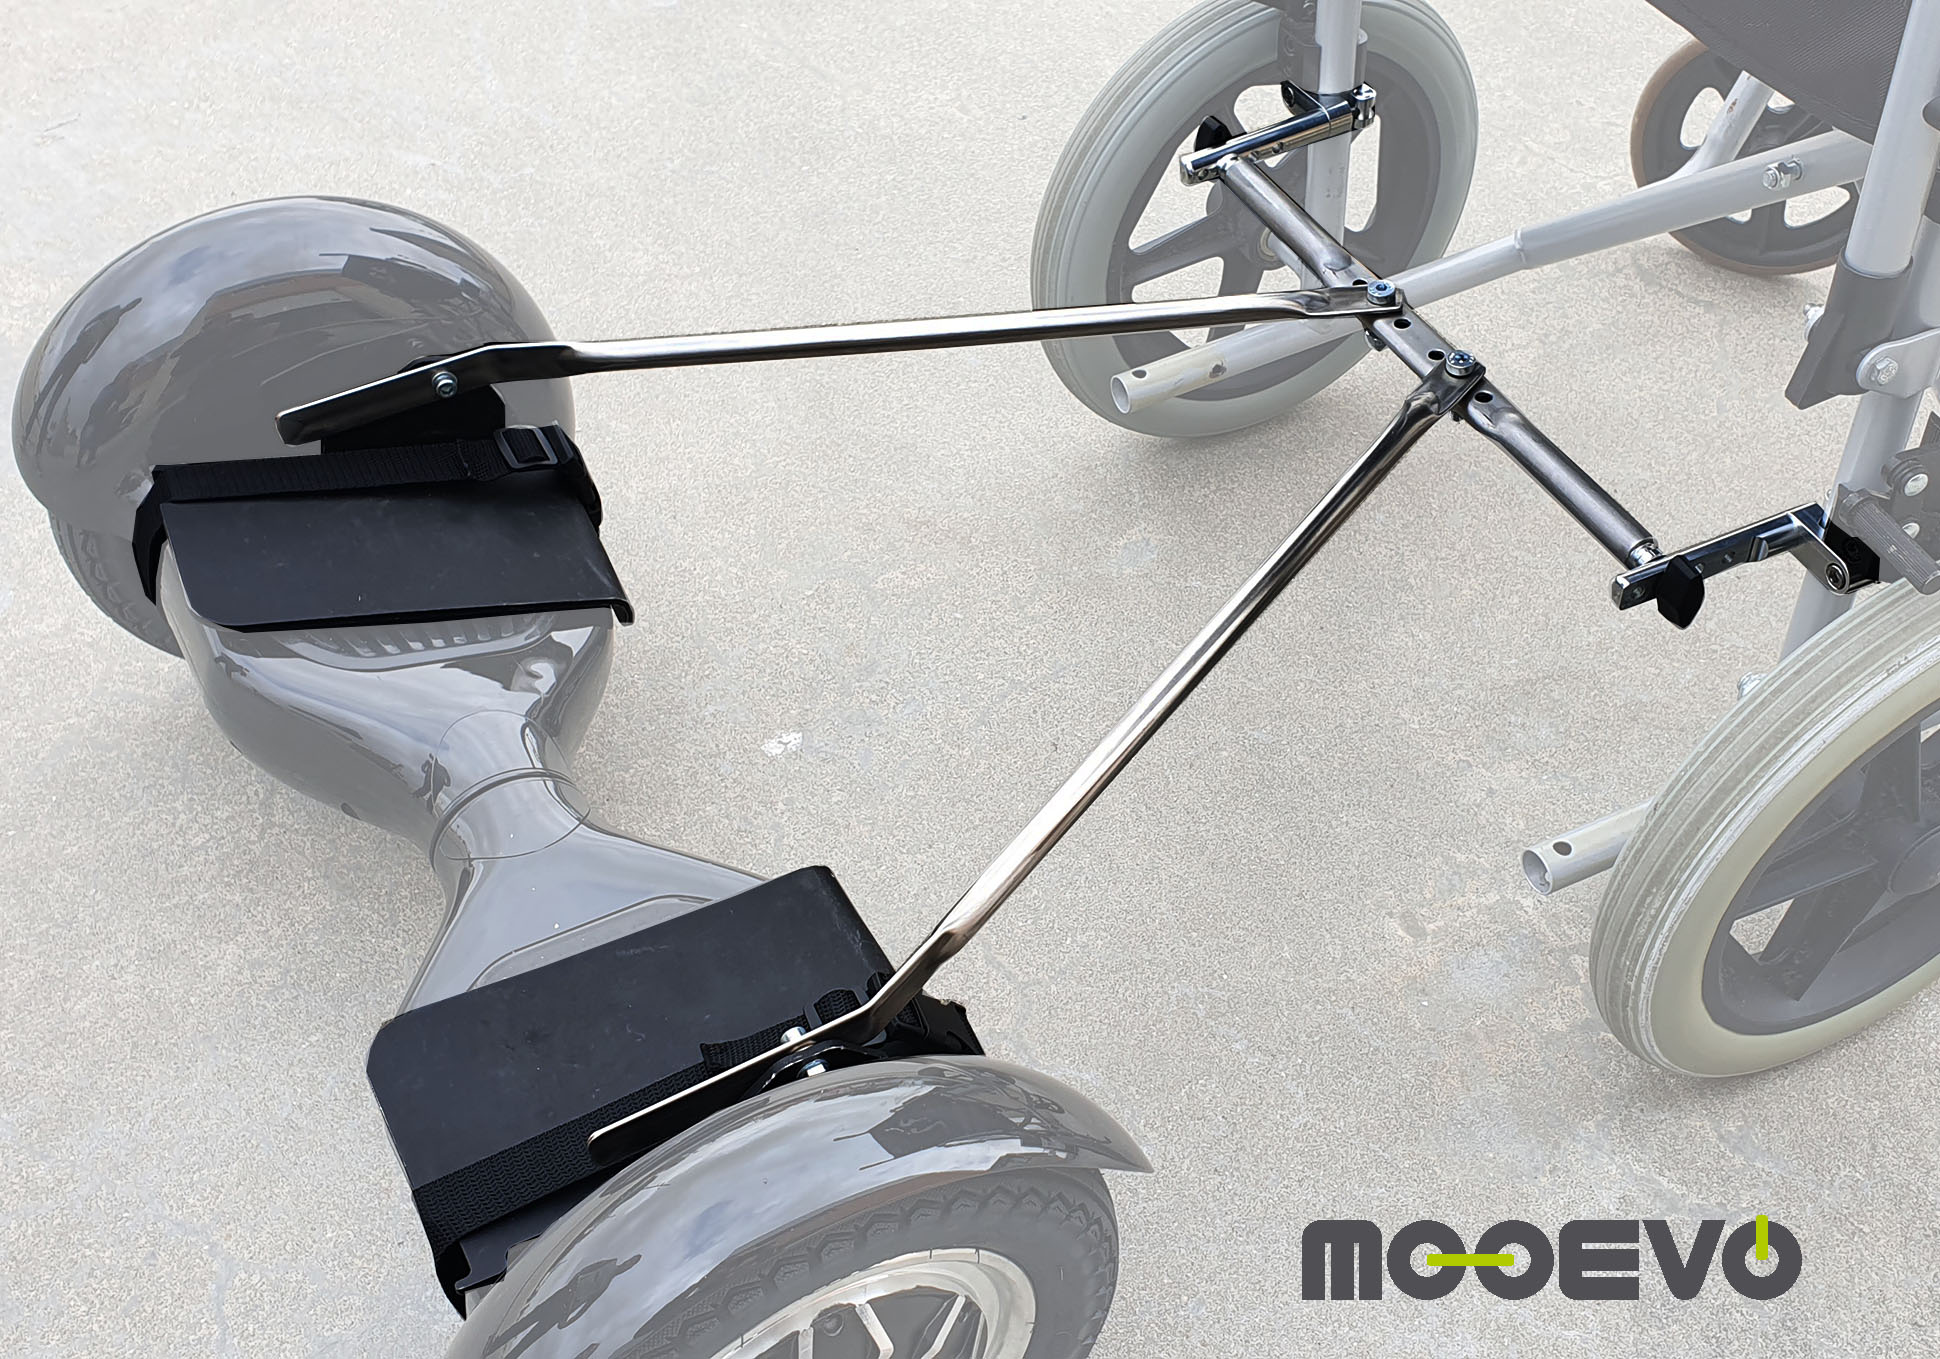 Mooevo Kit: Hoverboard to Wheelchair Adapter